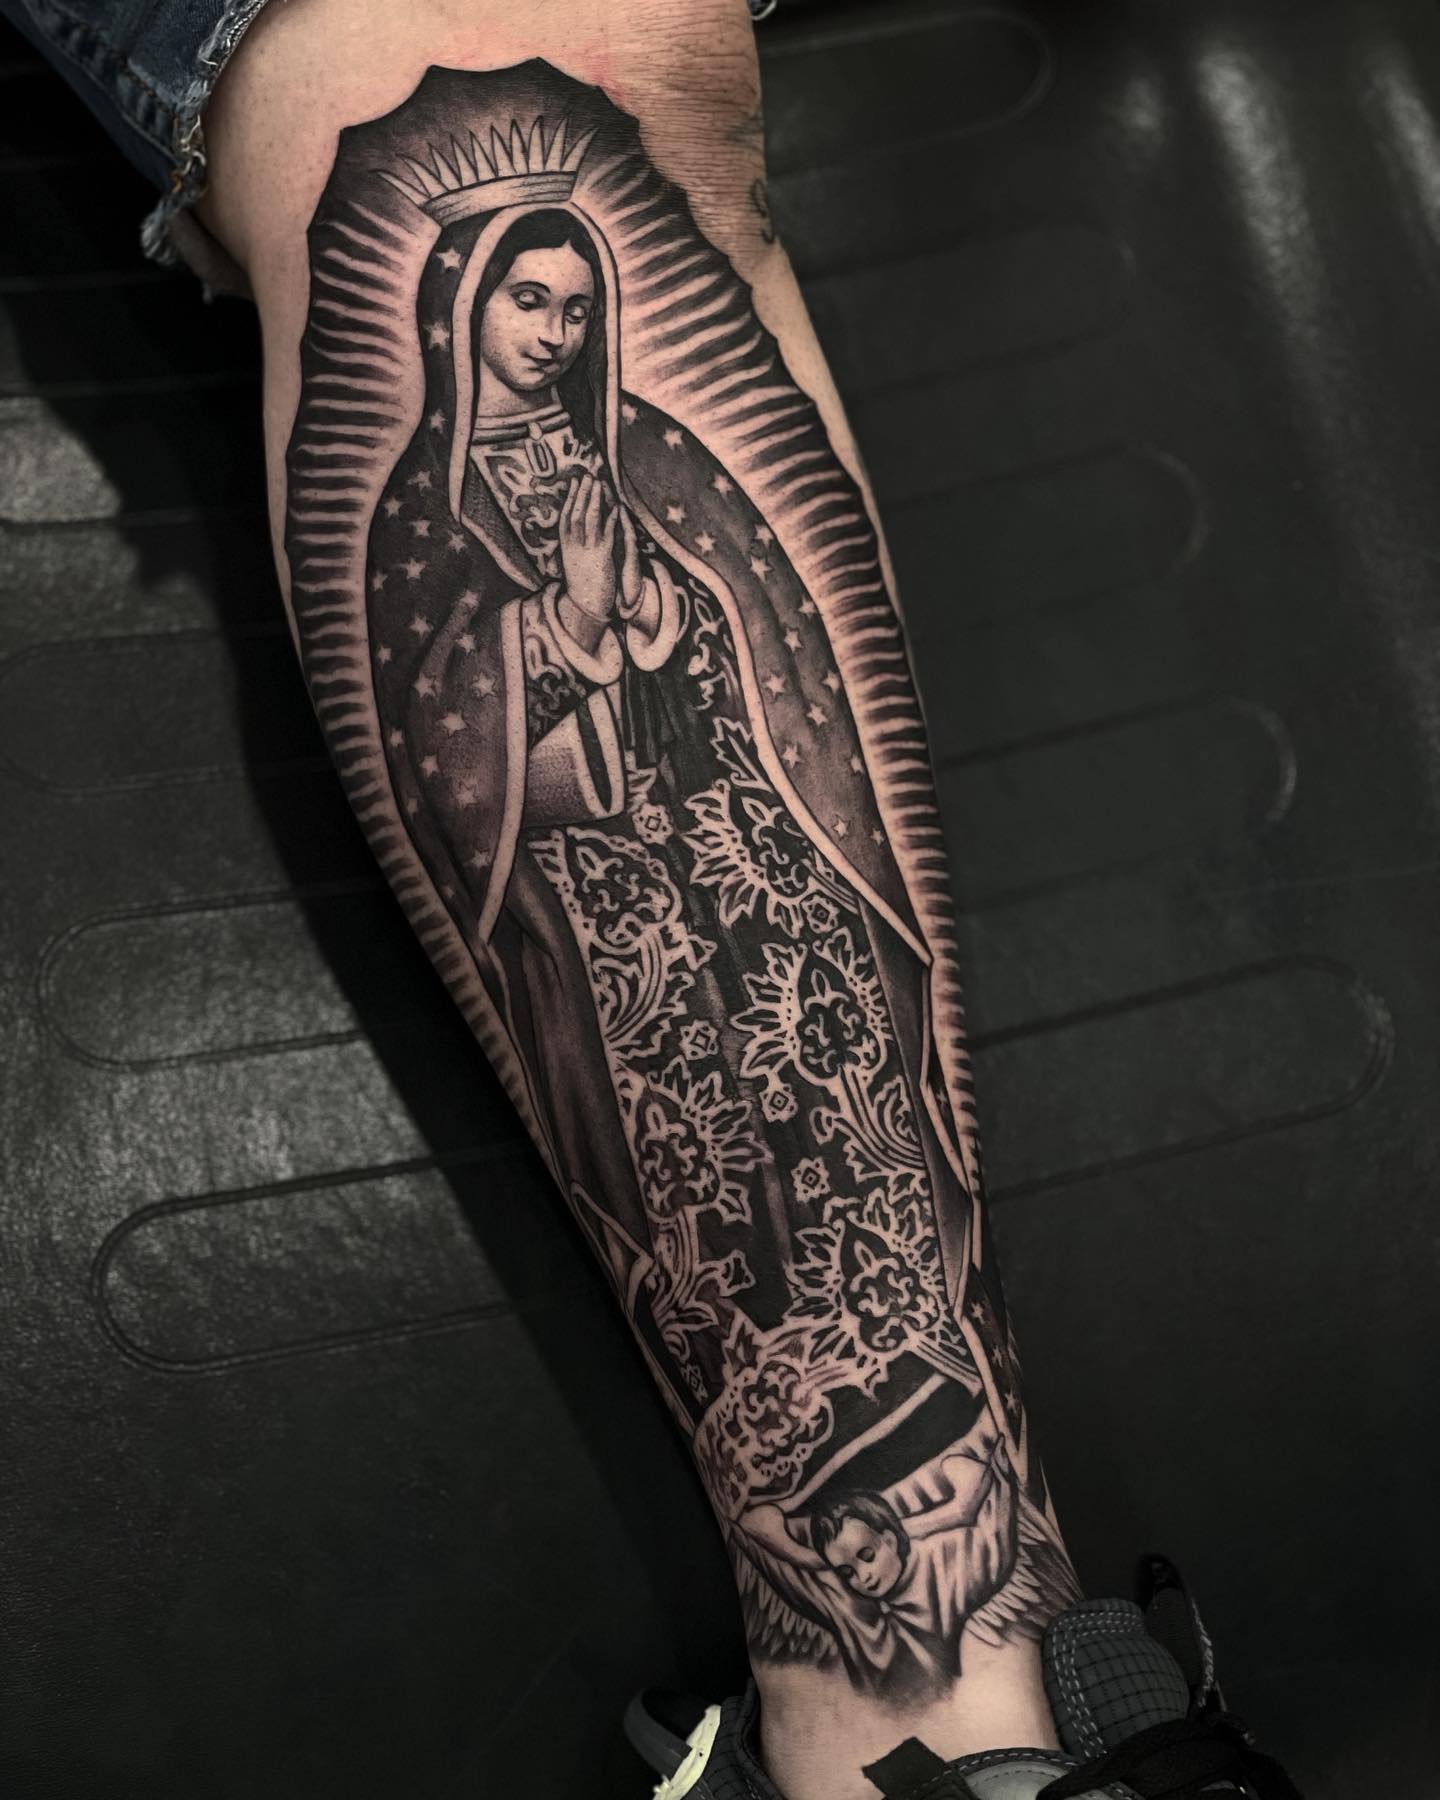 Virgen de guadalupe tattoo meaning